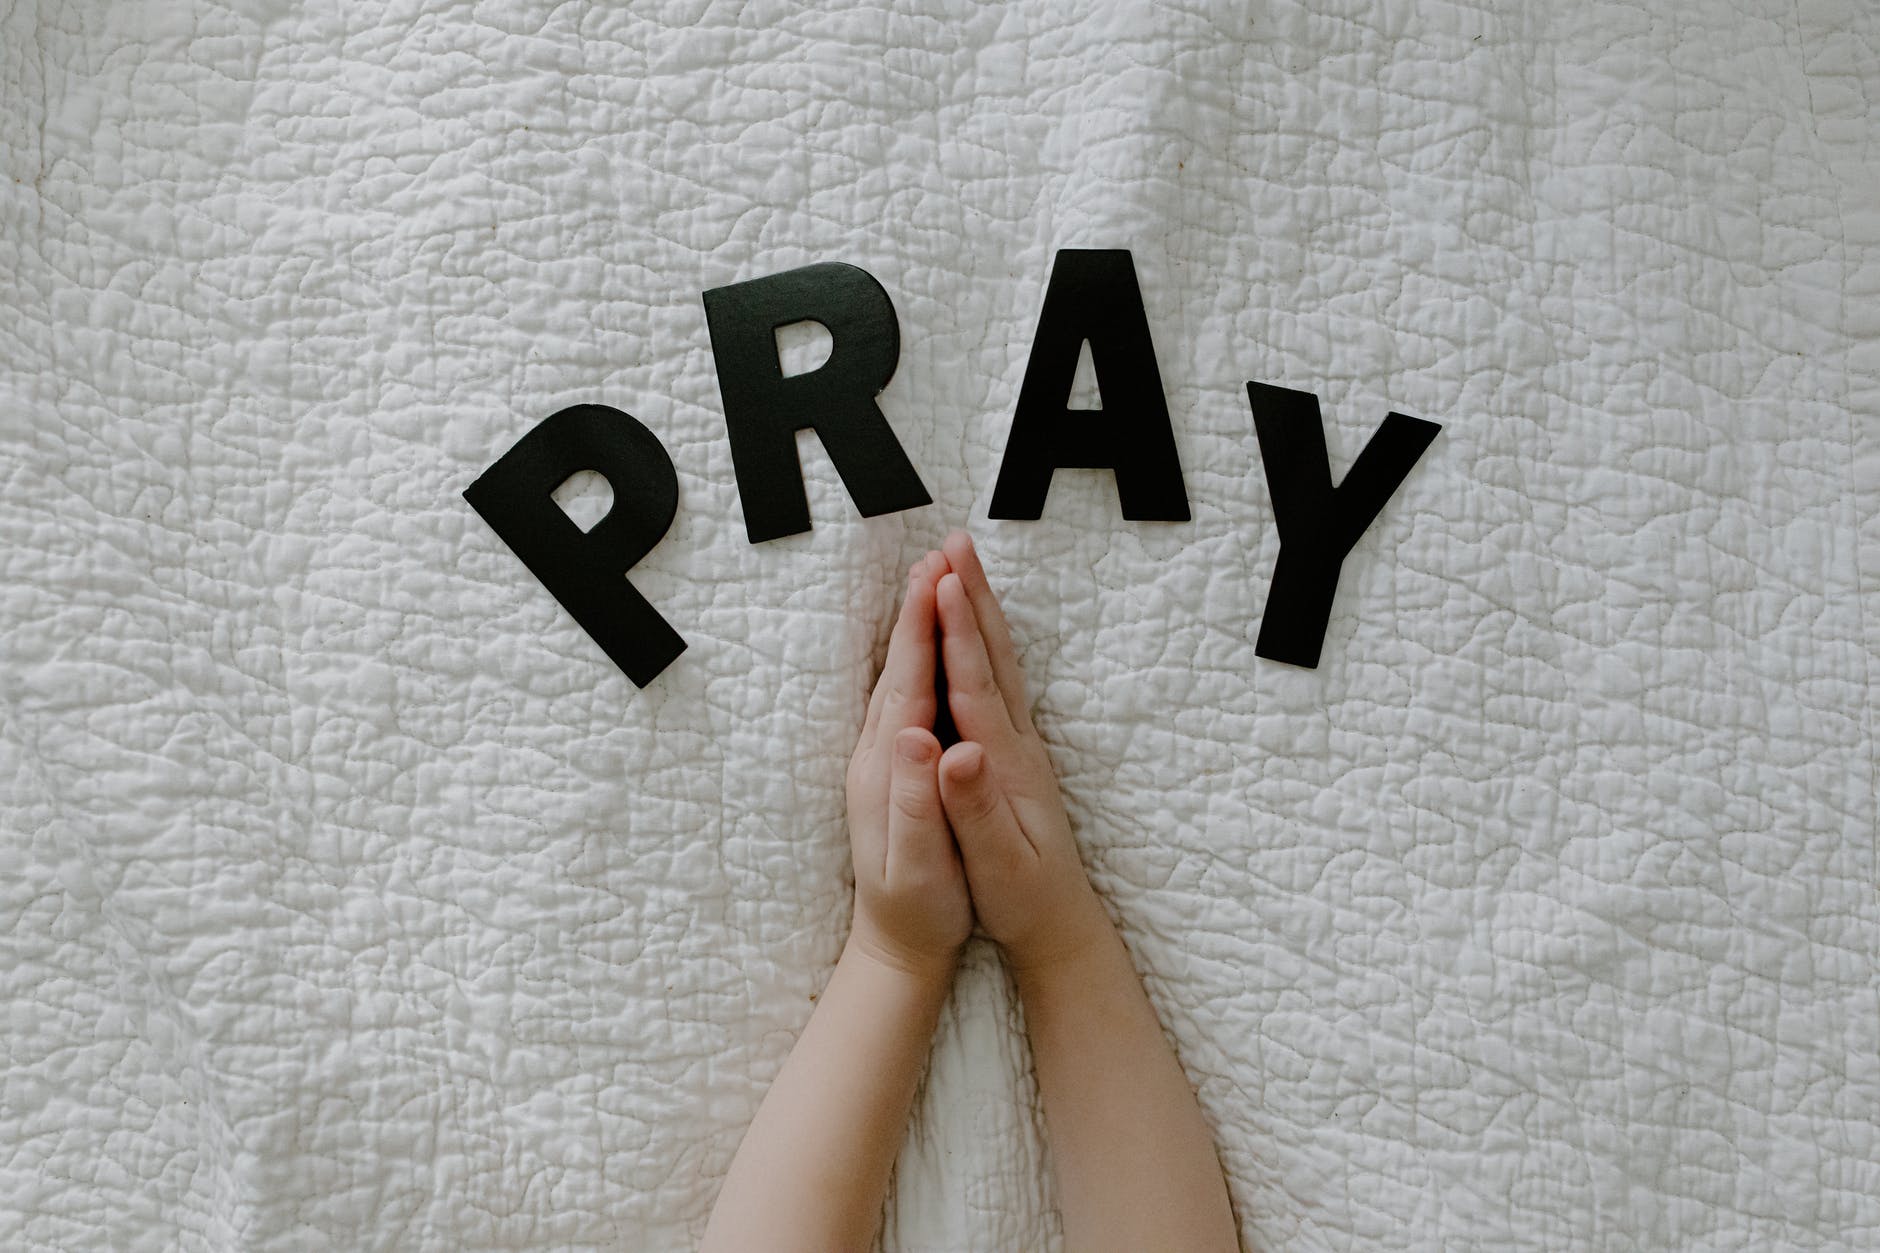 praying hands of a person on white textile